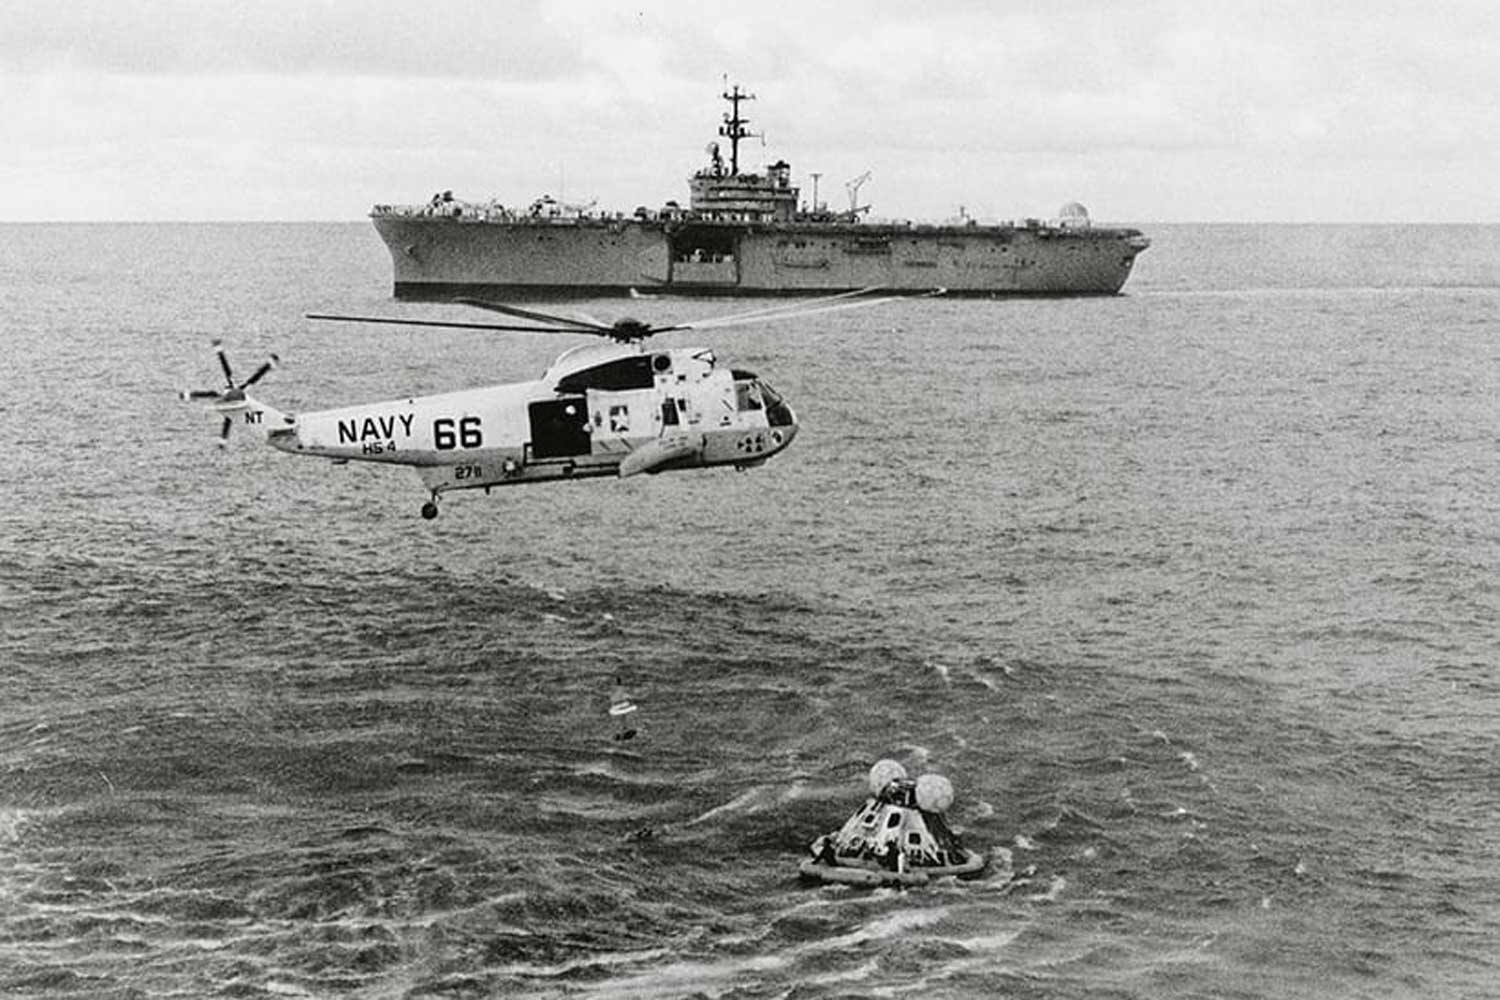 The Apollo 13 crew was recovered by the Iwo Jima ship seen in the backdrop here.